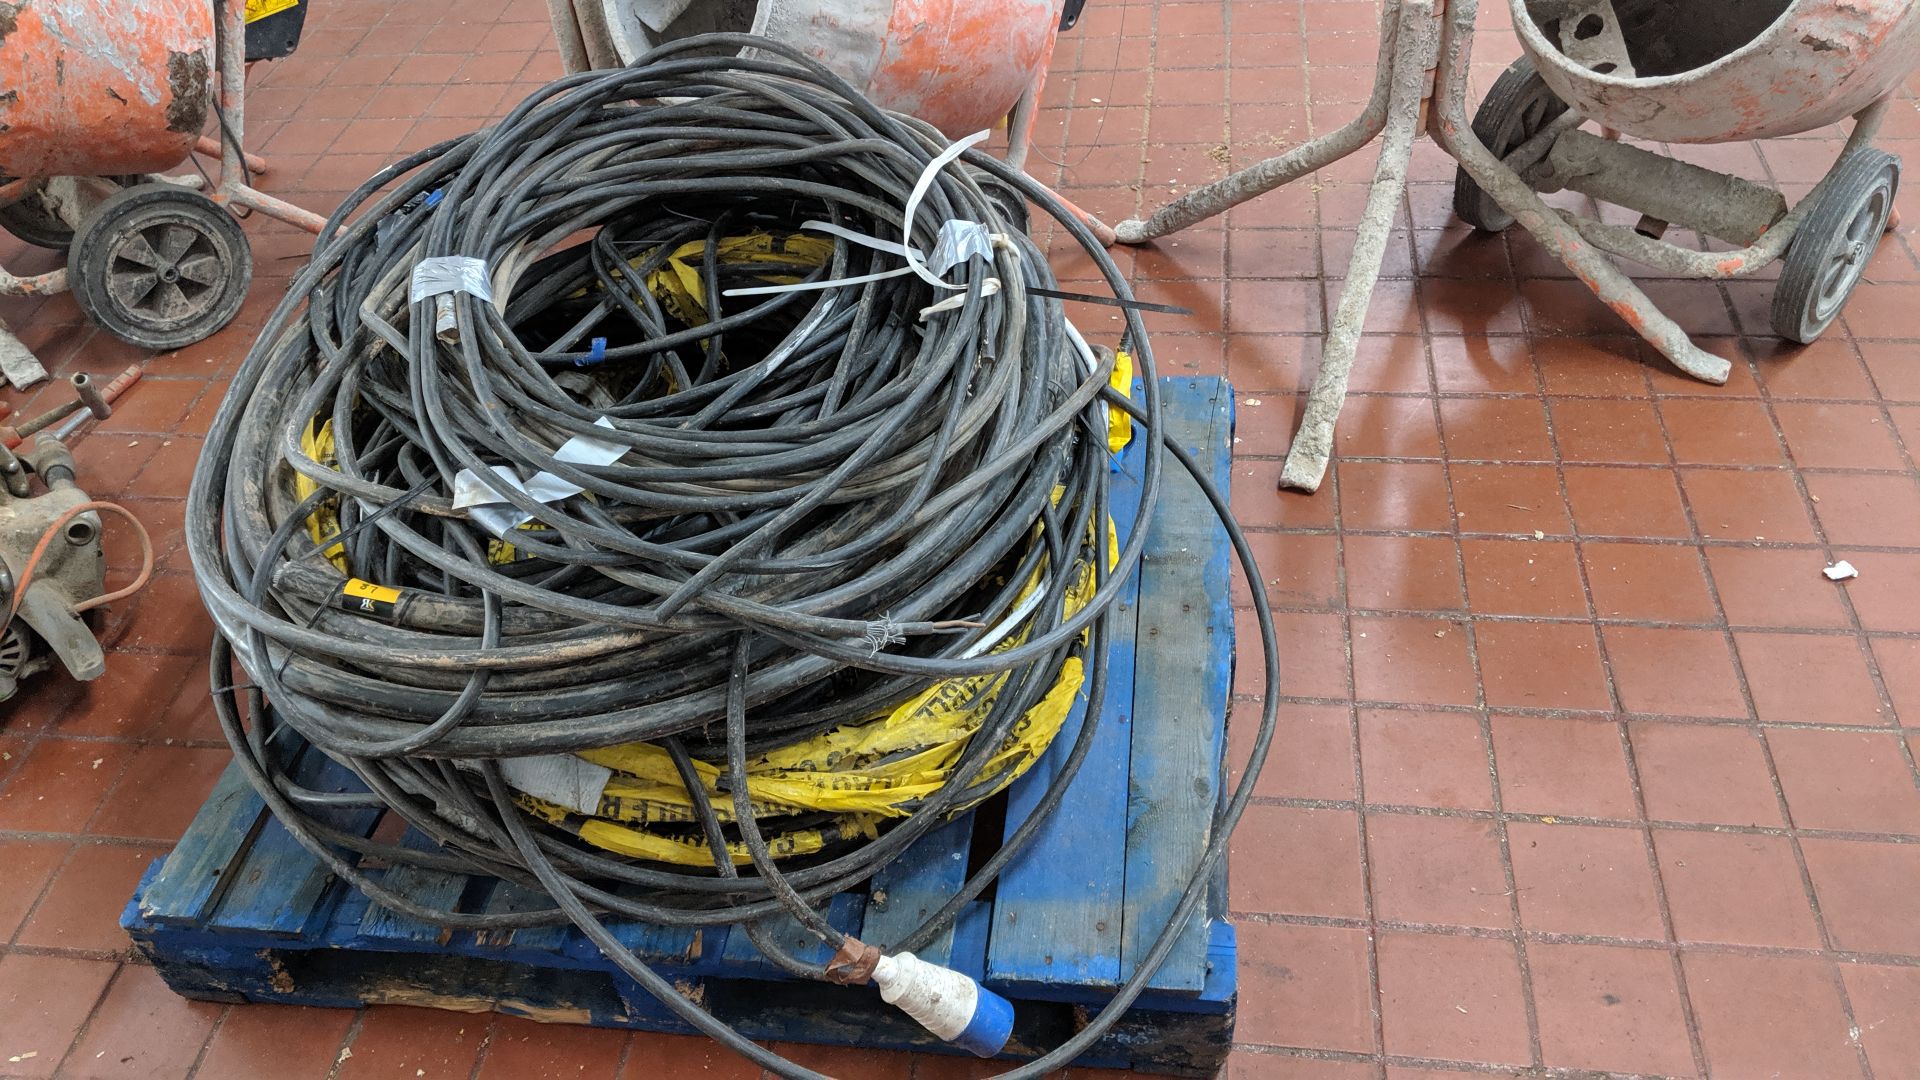 The contents of a pallet of heavy duty electrical cable - appears to be armoured IMPORTANT: Please